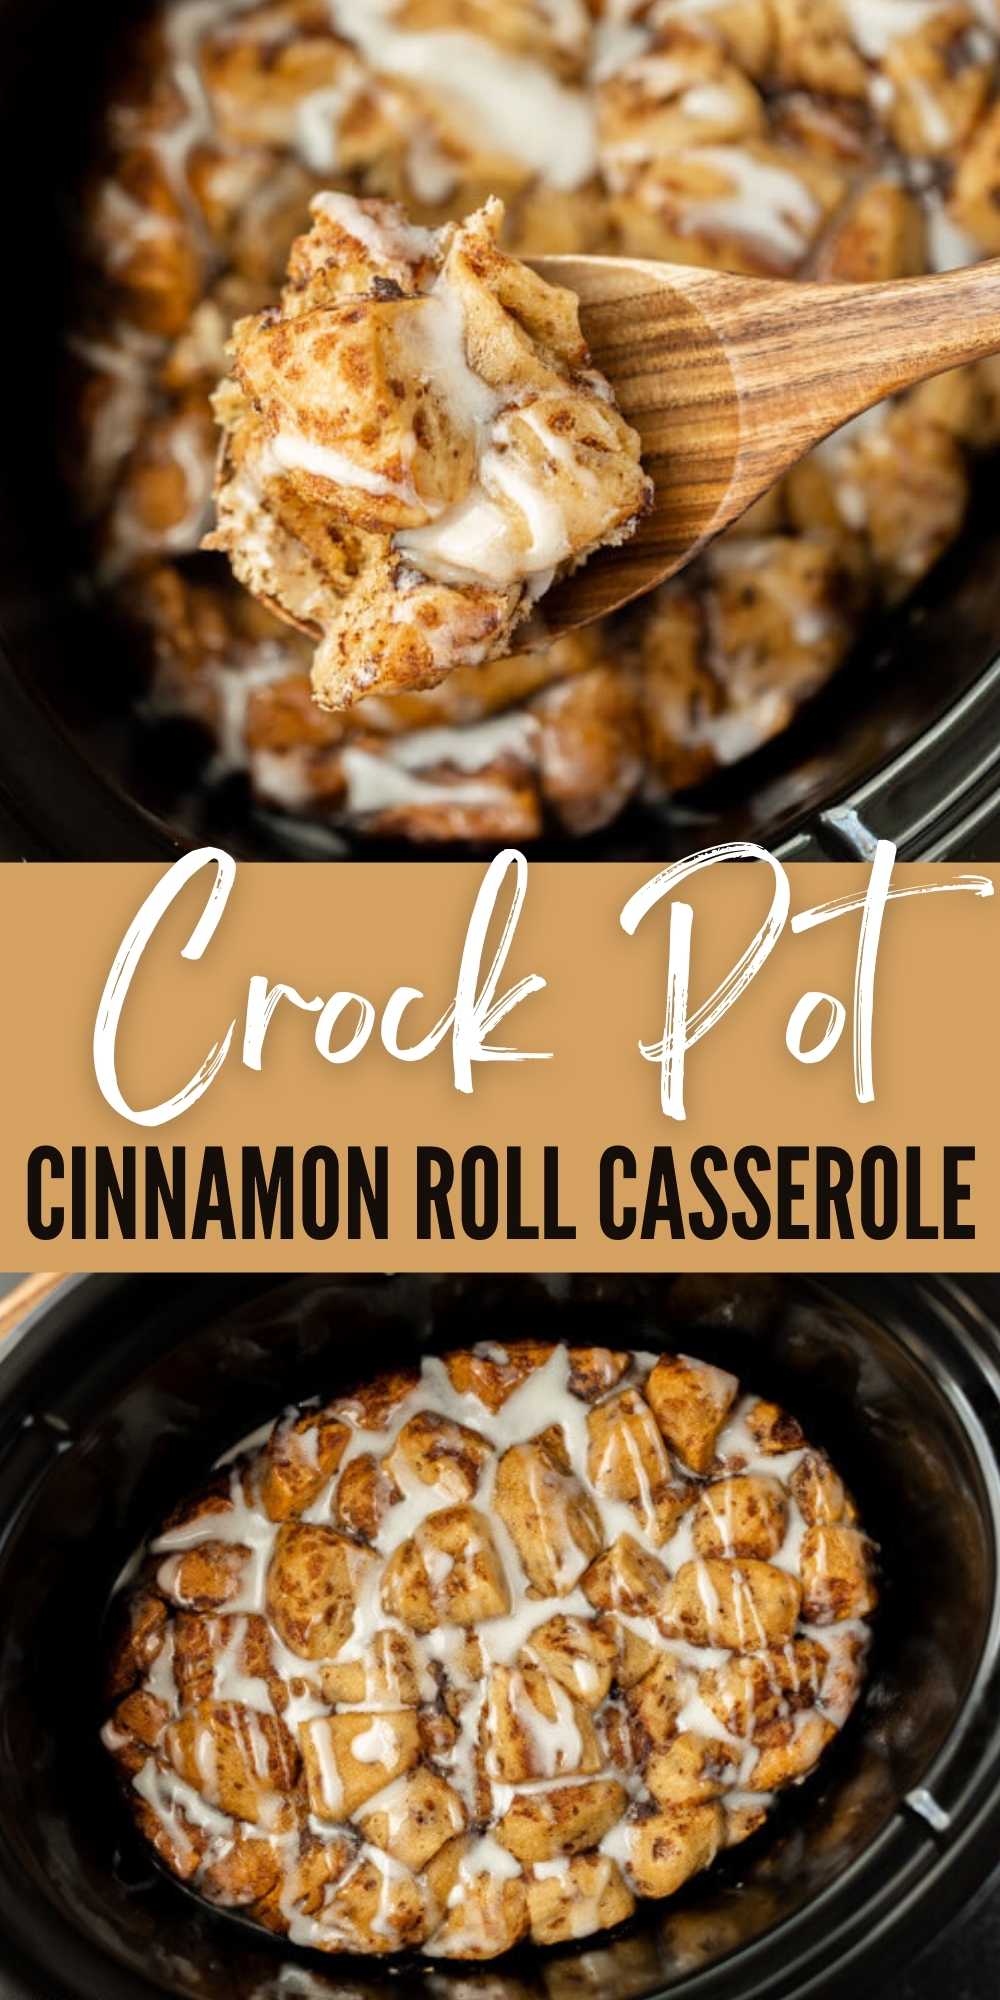 Crock Pot Cinnamon Roll Casserole (and VIDEO) – Eating on a Dime